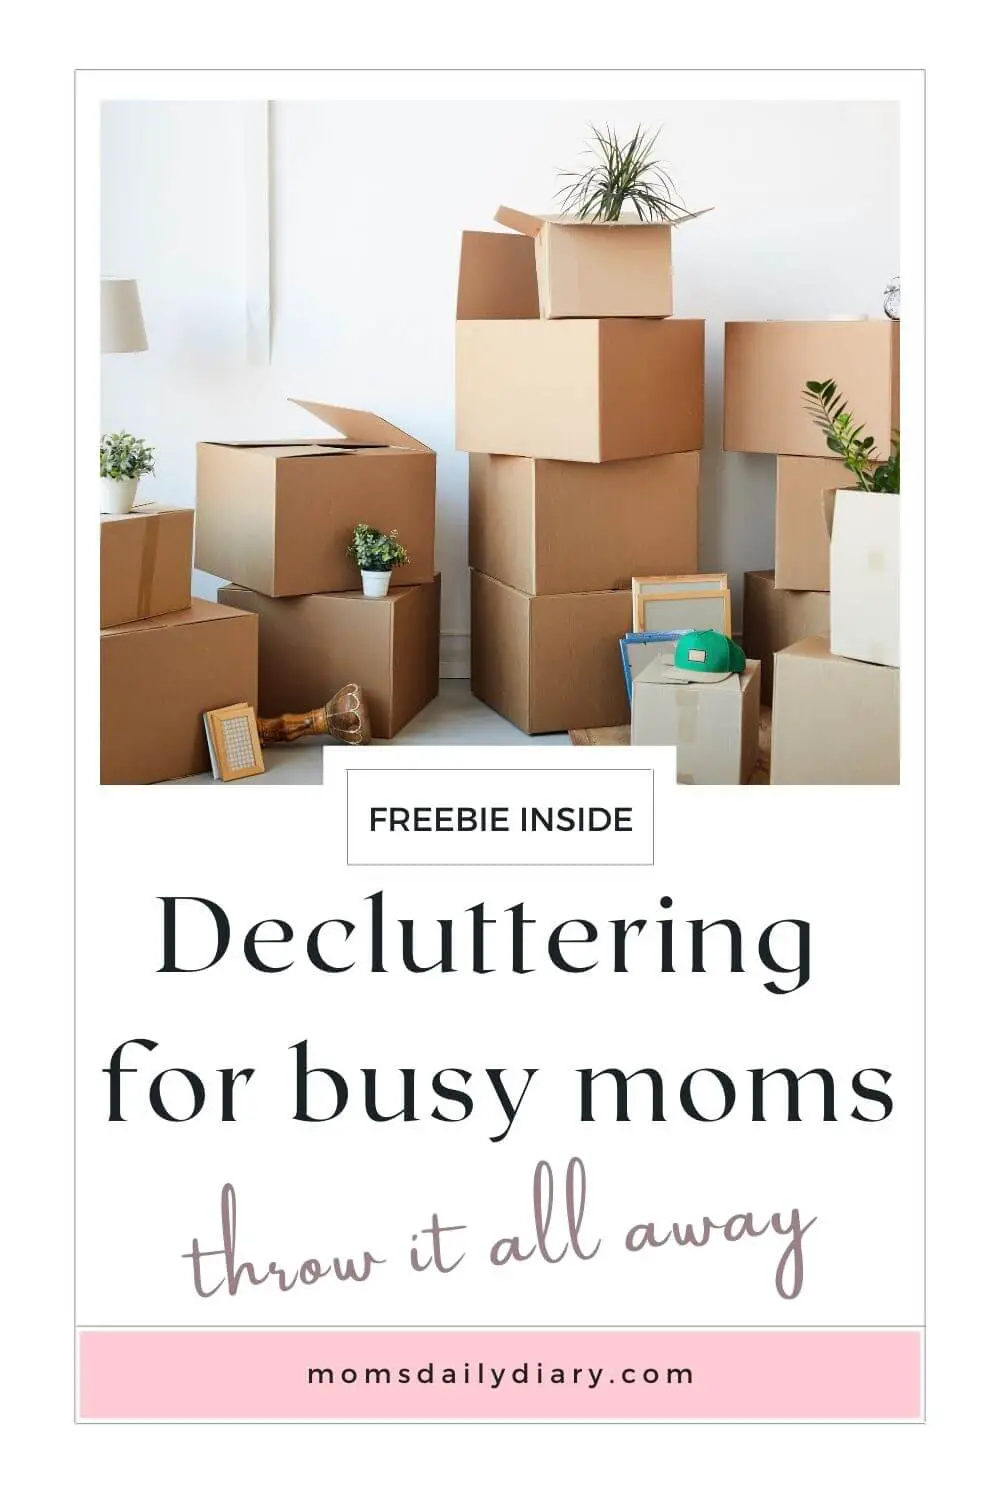 Pinterest pin with text: "Decluttering for busy moms. Throw it all away. morganboulevard.com" and image of piles with boxes